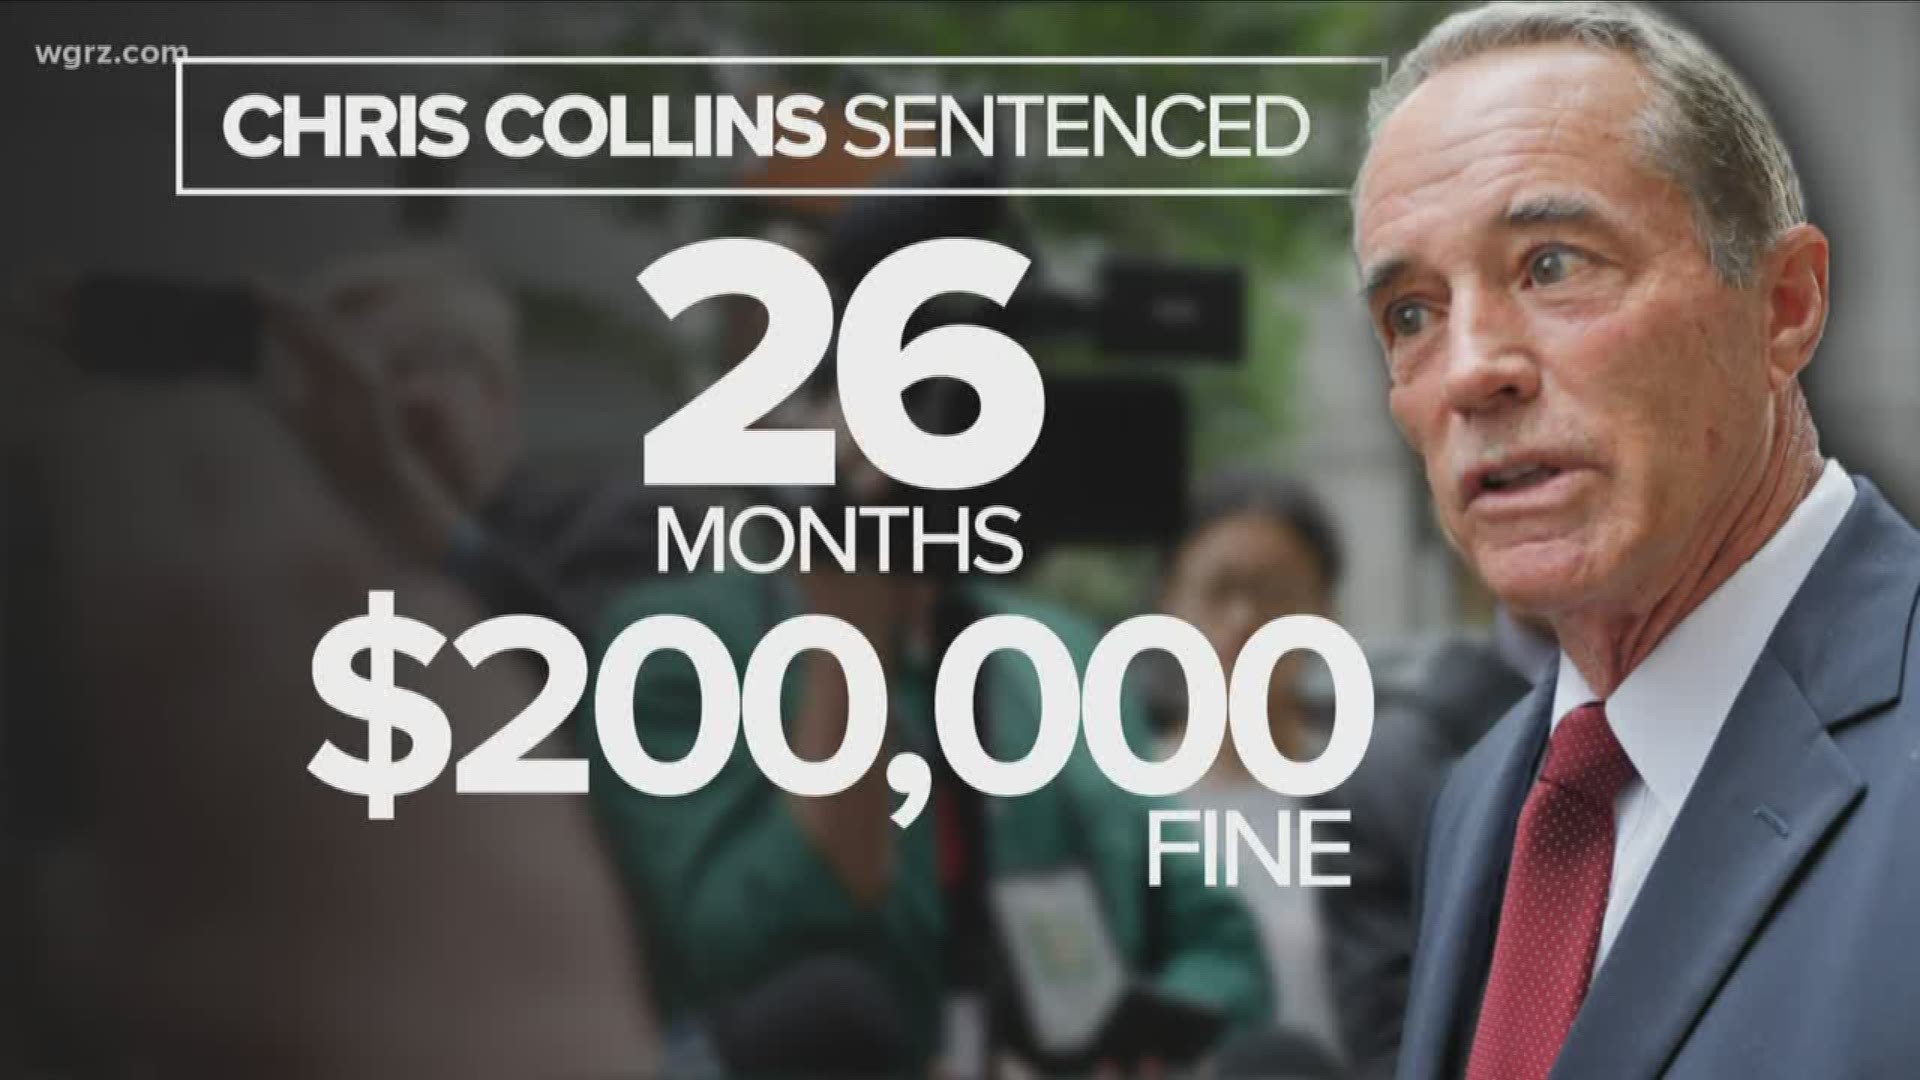 Disgraced former Congressman Chris Collins was sentenced Friday to 26 months in prison for insider trading